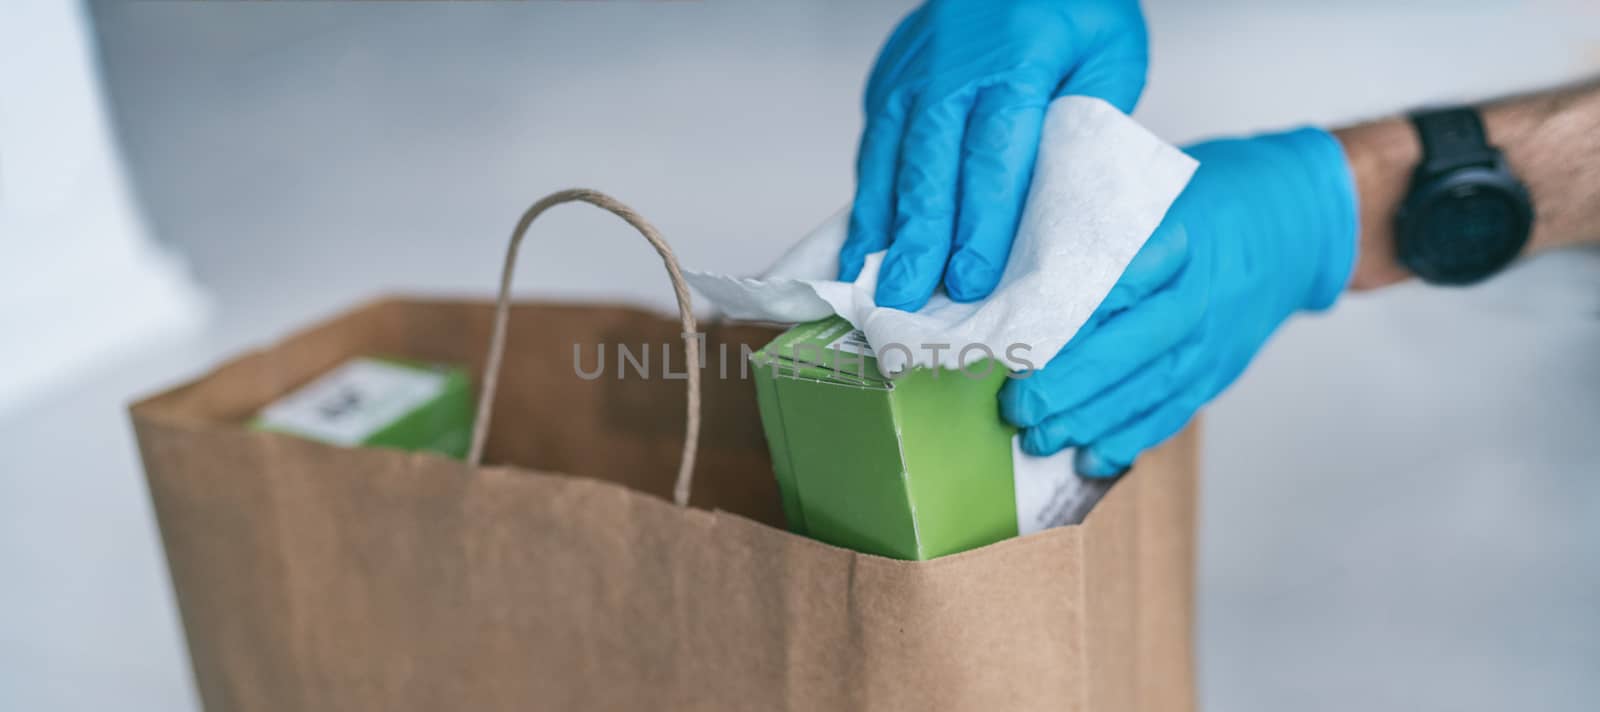 Coronavirus wiping down grocery packages after receiving home delivery wearing gloves, using disinfecting sanitizing wipes to wipe the surfaces clean. Cleaning of COVID-19 virus.